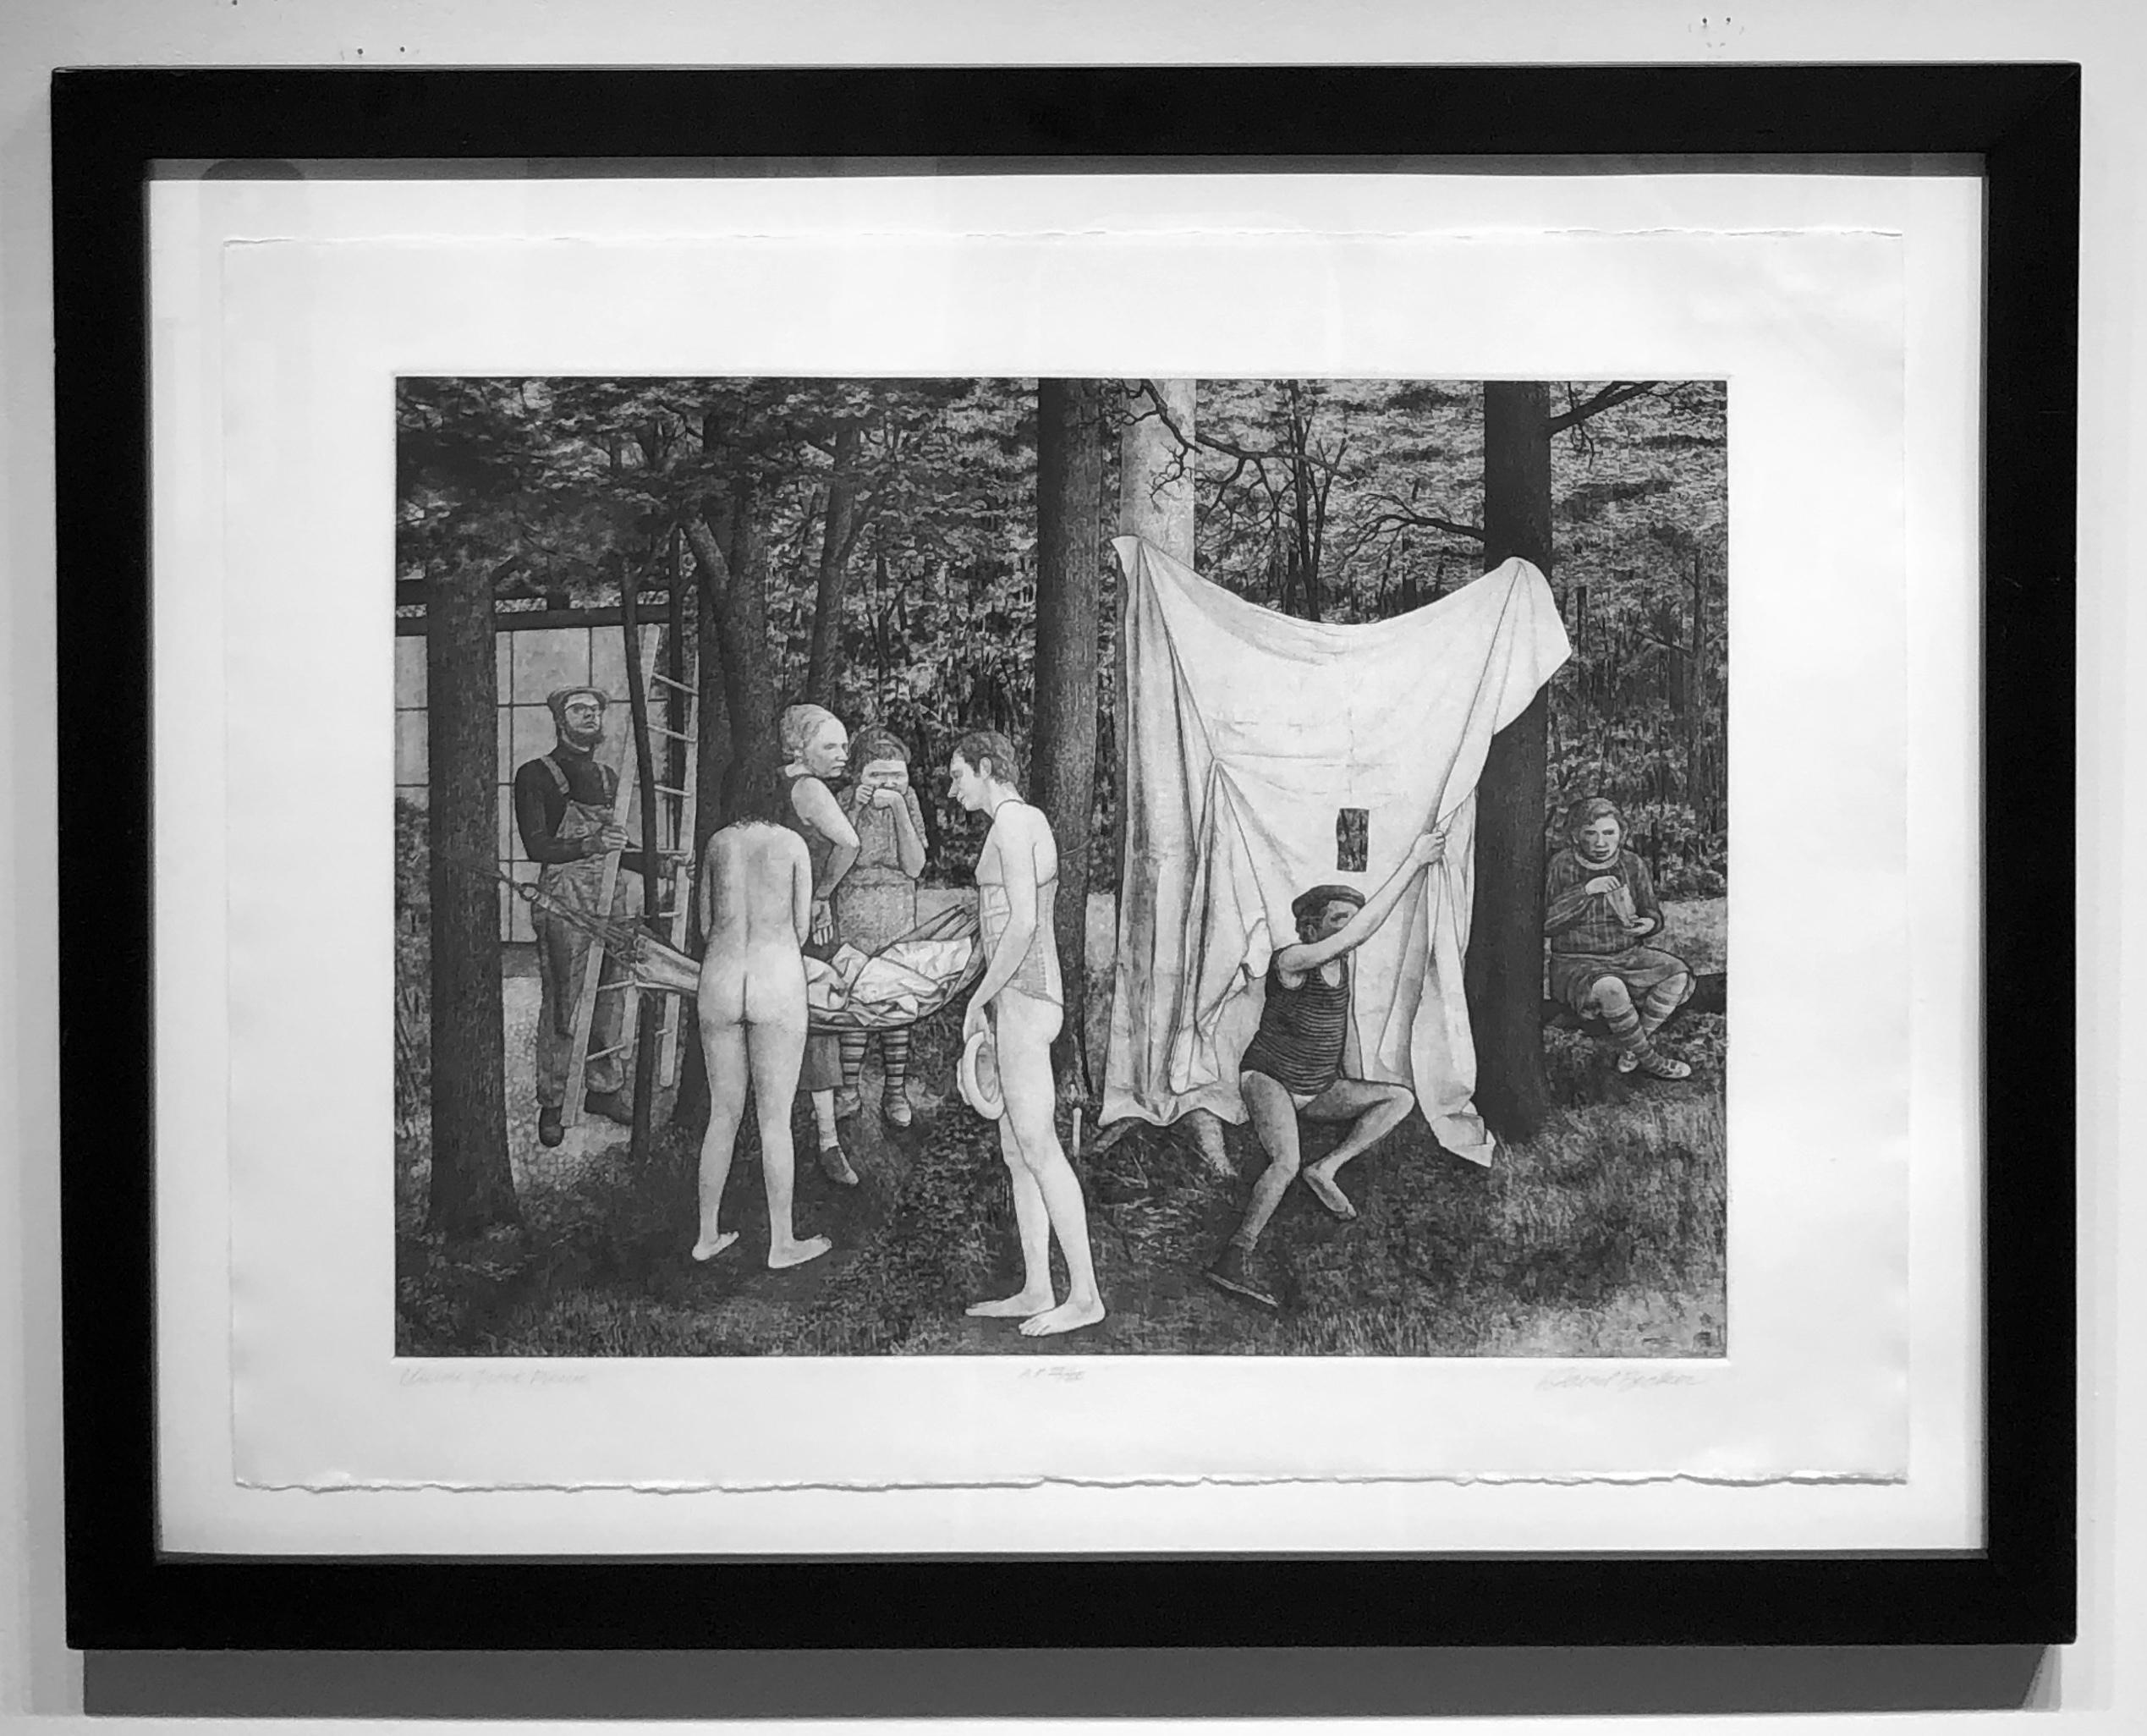 Union Grove Picnic -Surreal Allegorical Landscape with Multiple Figures, Etching - Print by David Becker